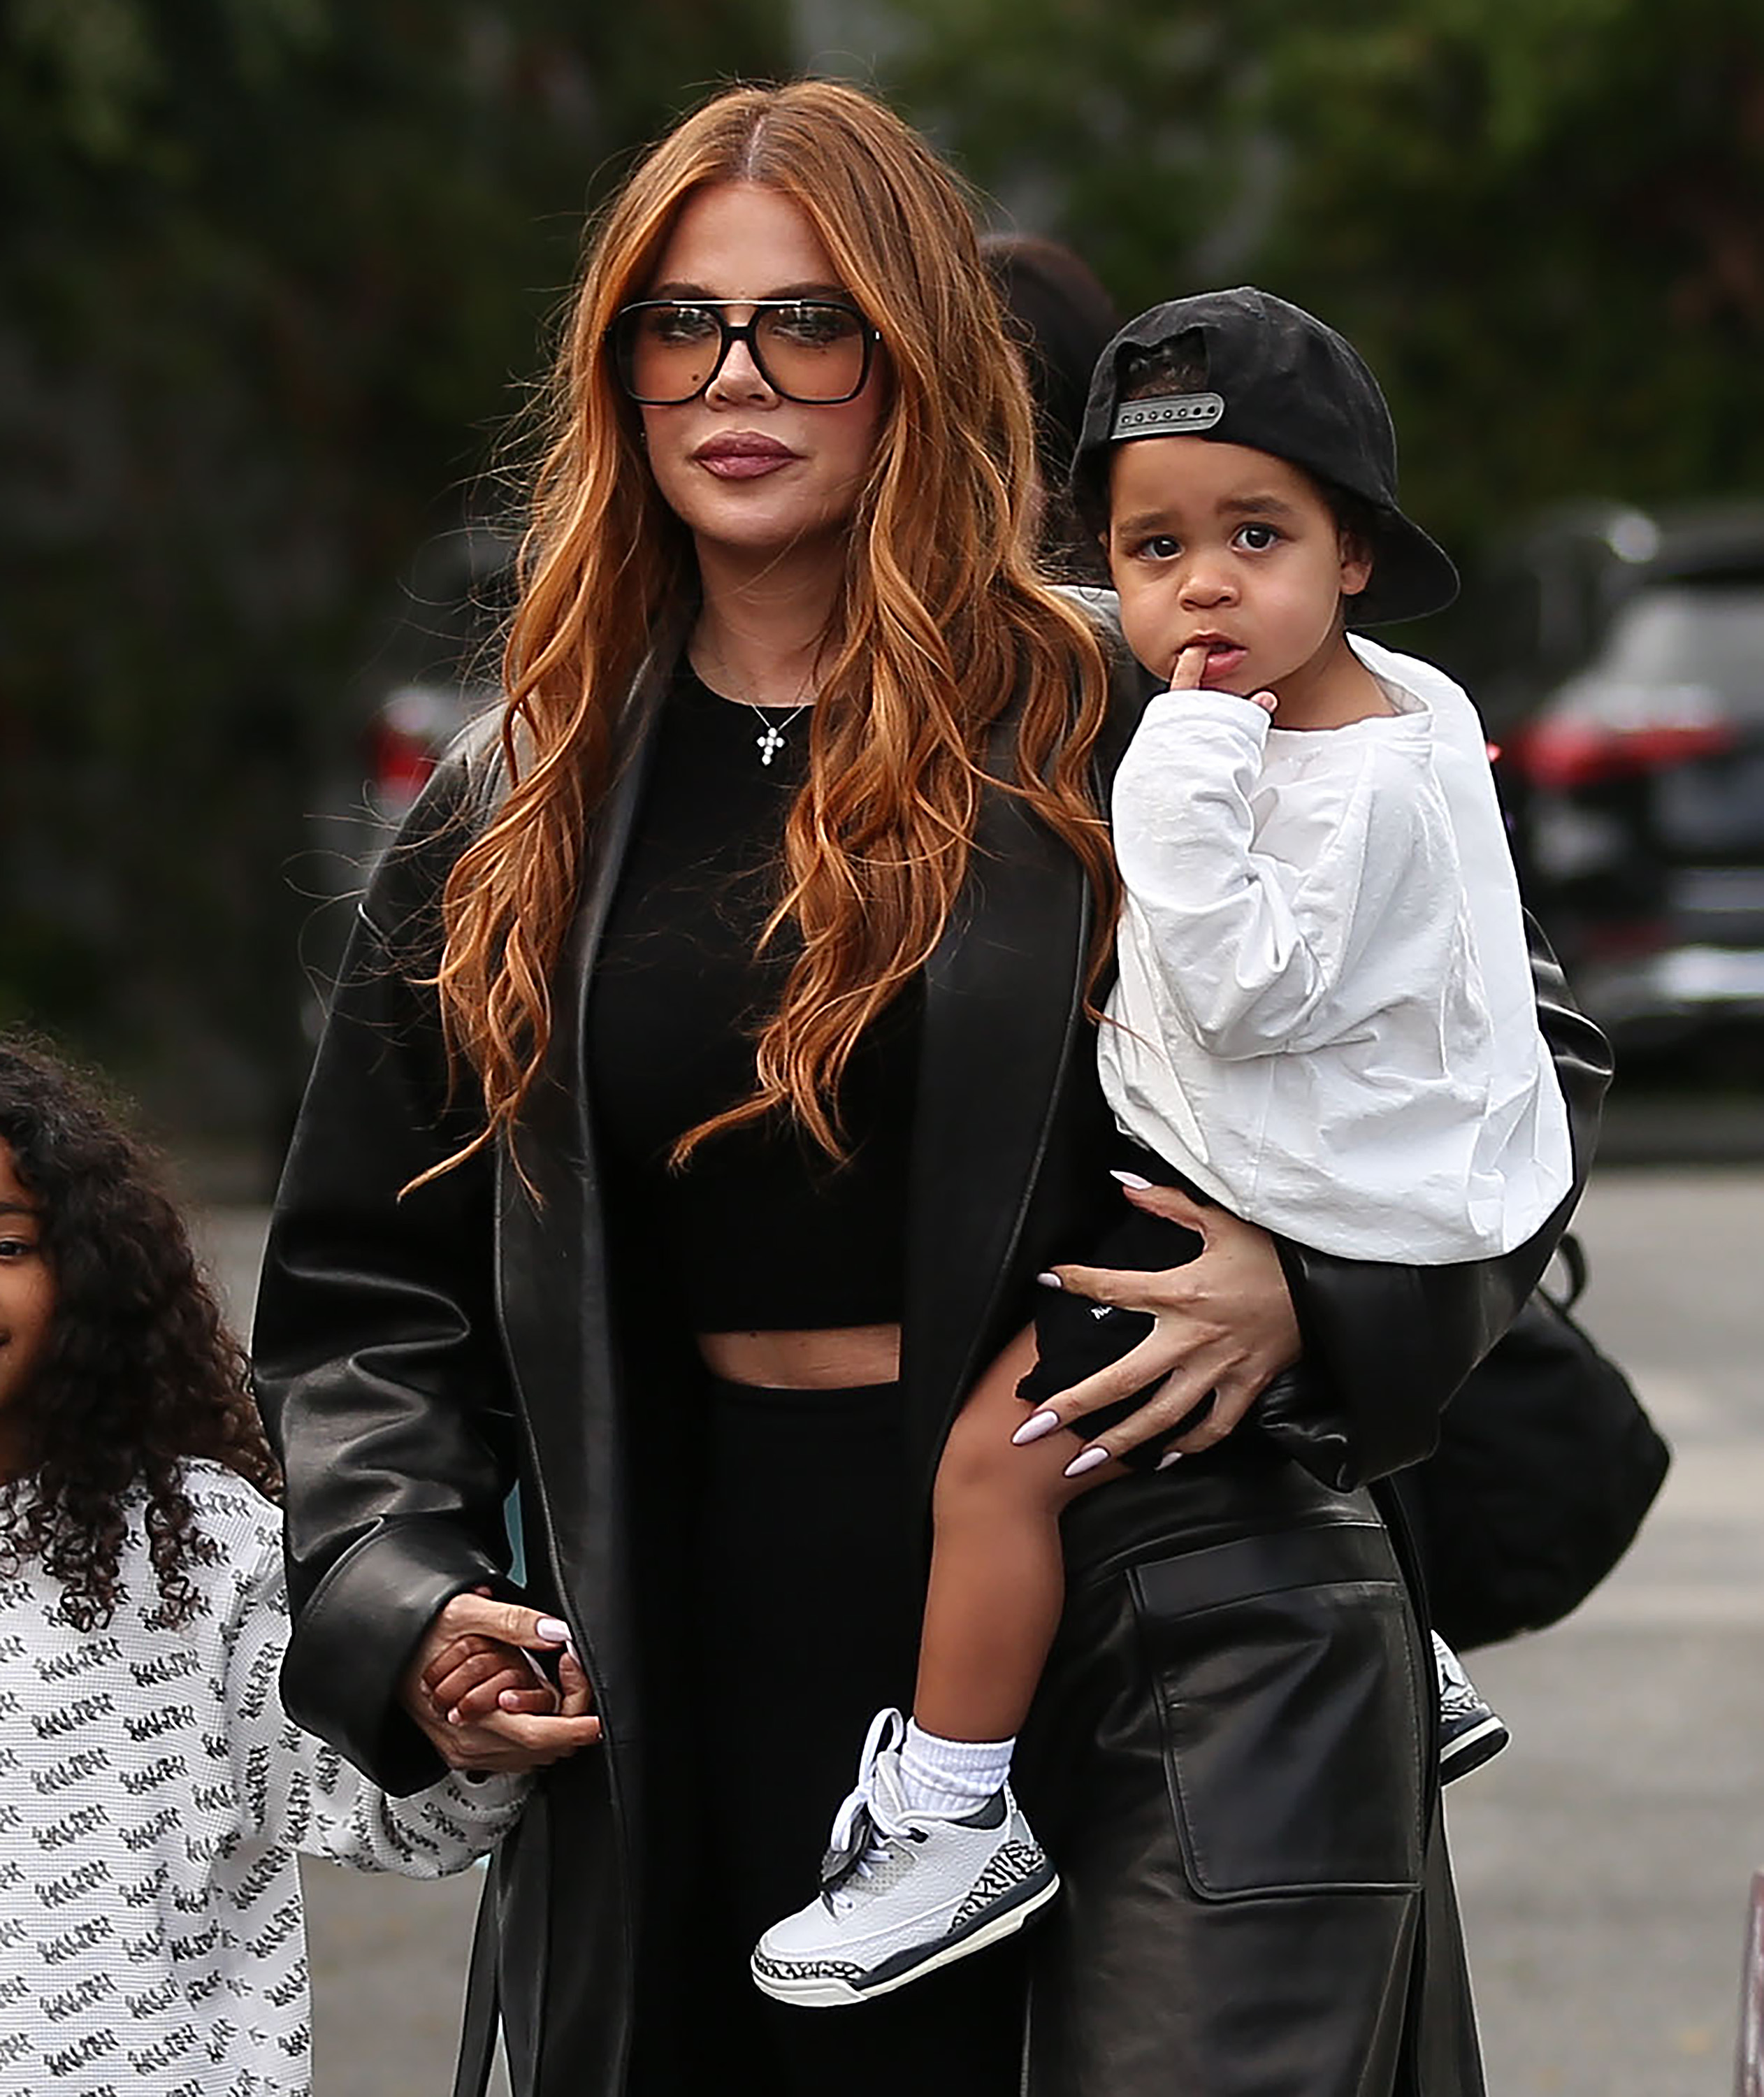 Khloe brought her kids along to Saint West's game